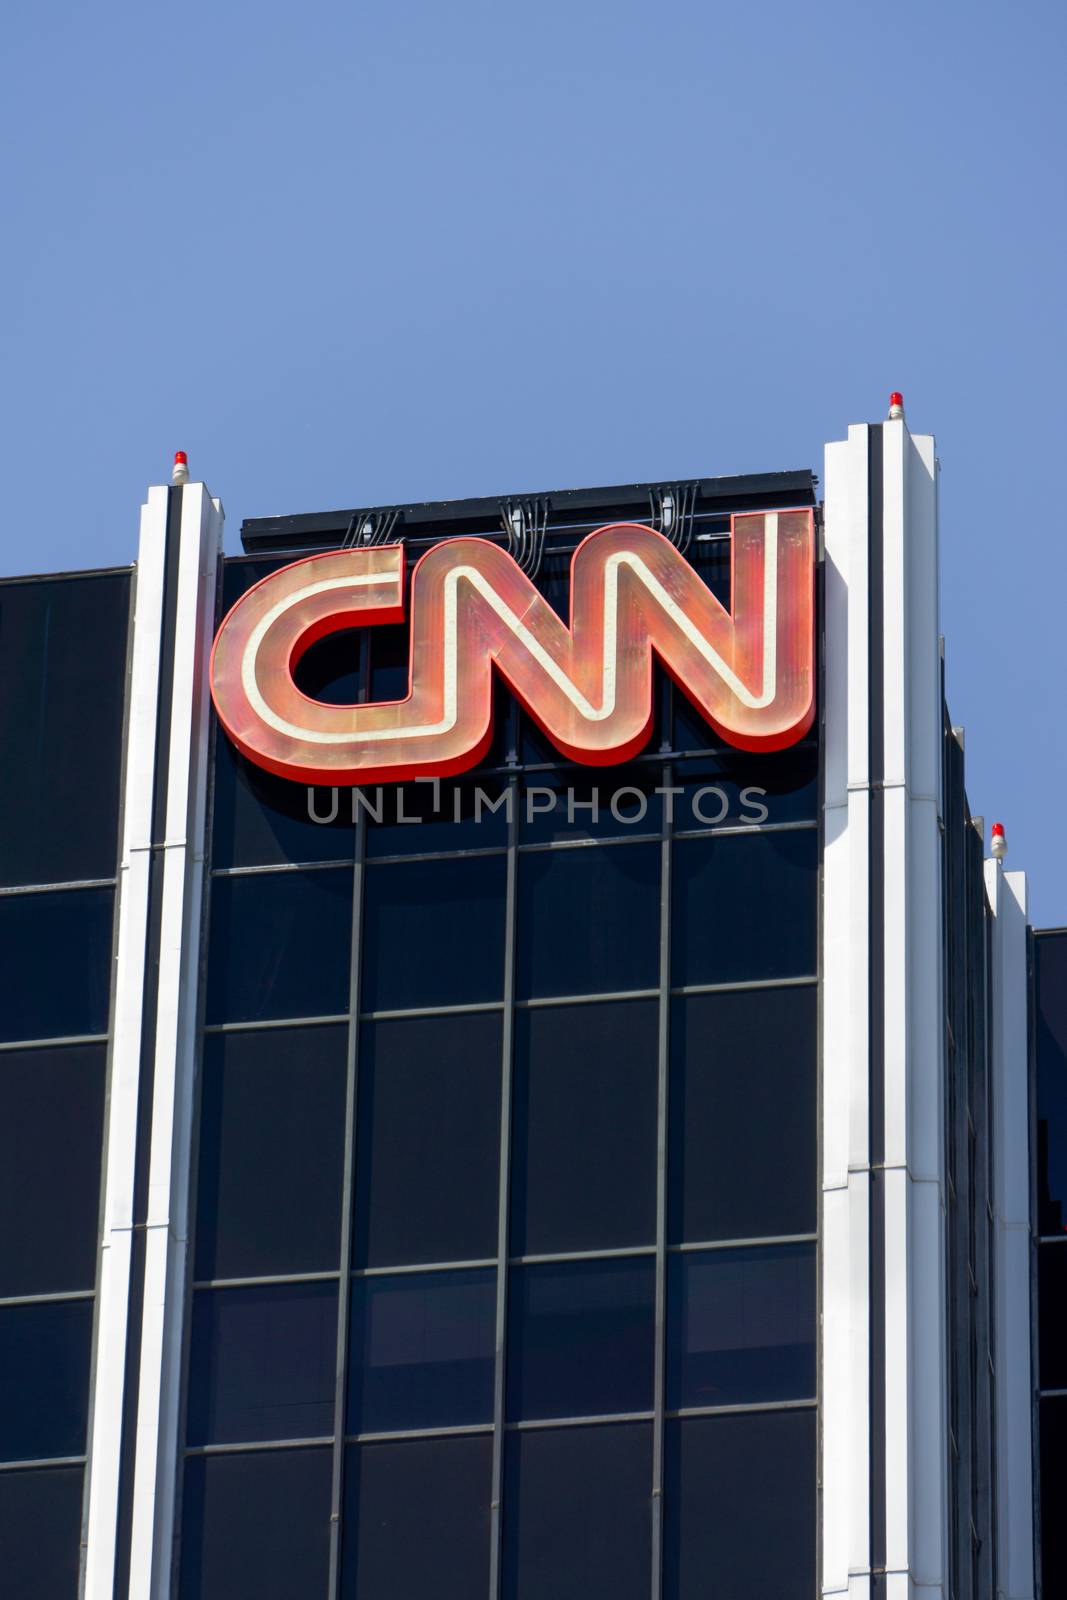 HOLLYWOOD, CA/USA - APRIL 18, 2015: CNN building exterior and logo. Cable News Network (CNN) is an American basic cable and satellite television channel that is owned by Time Warner.